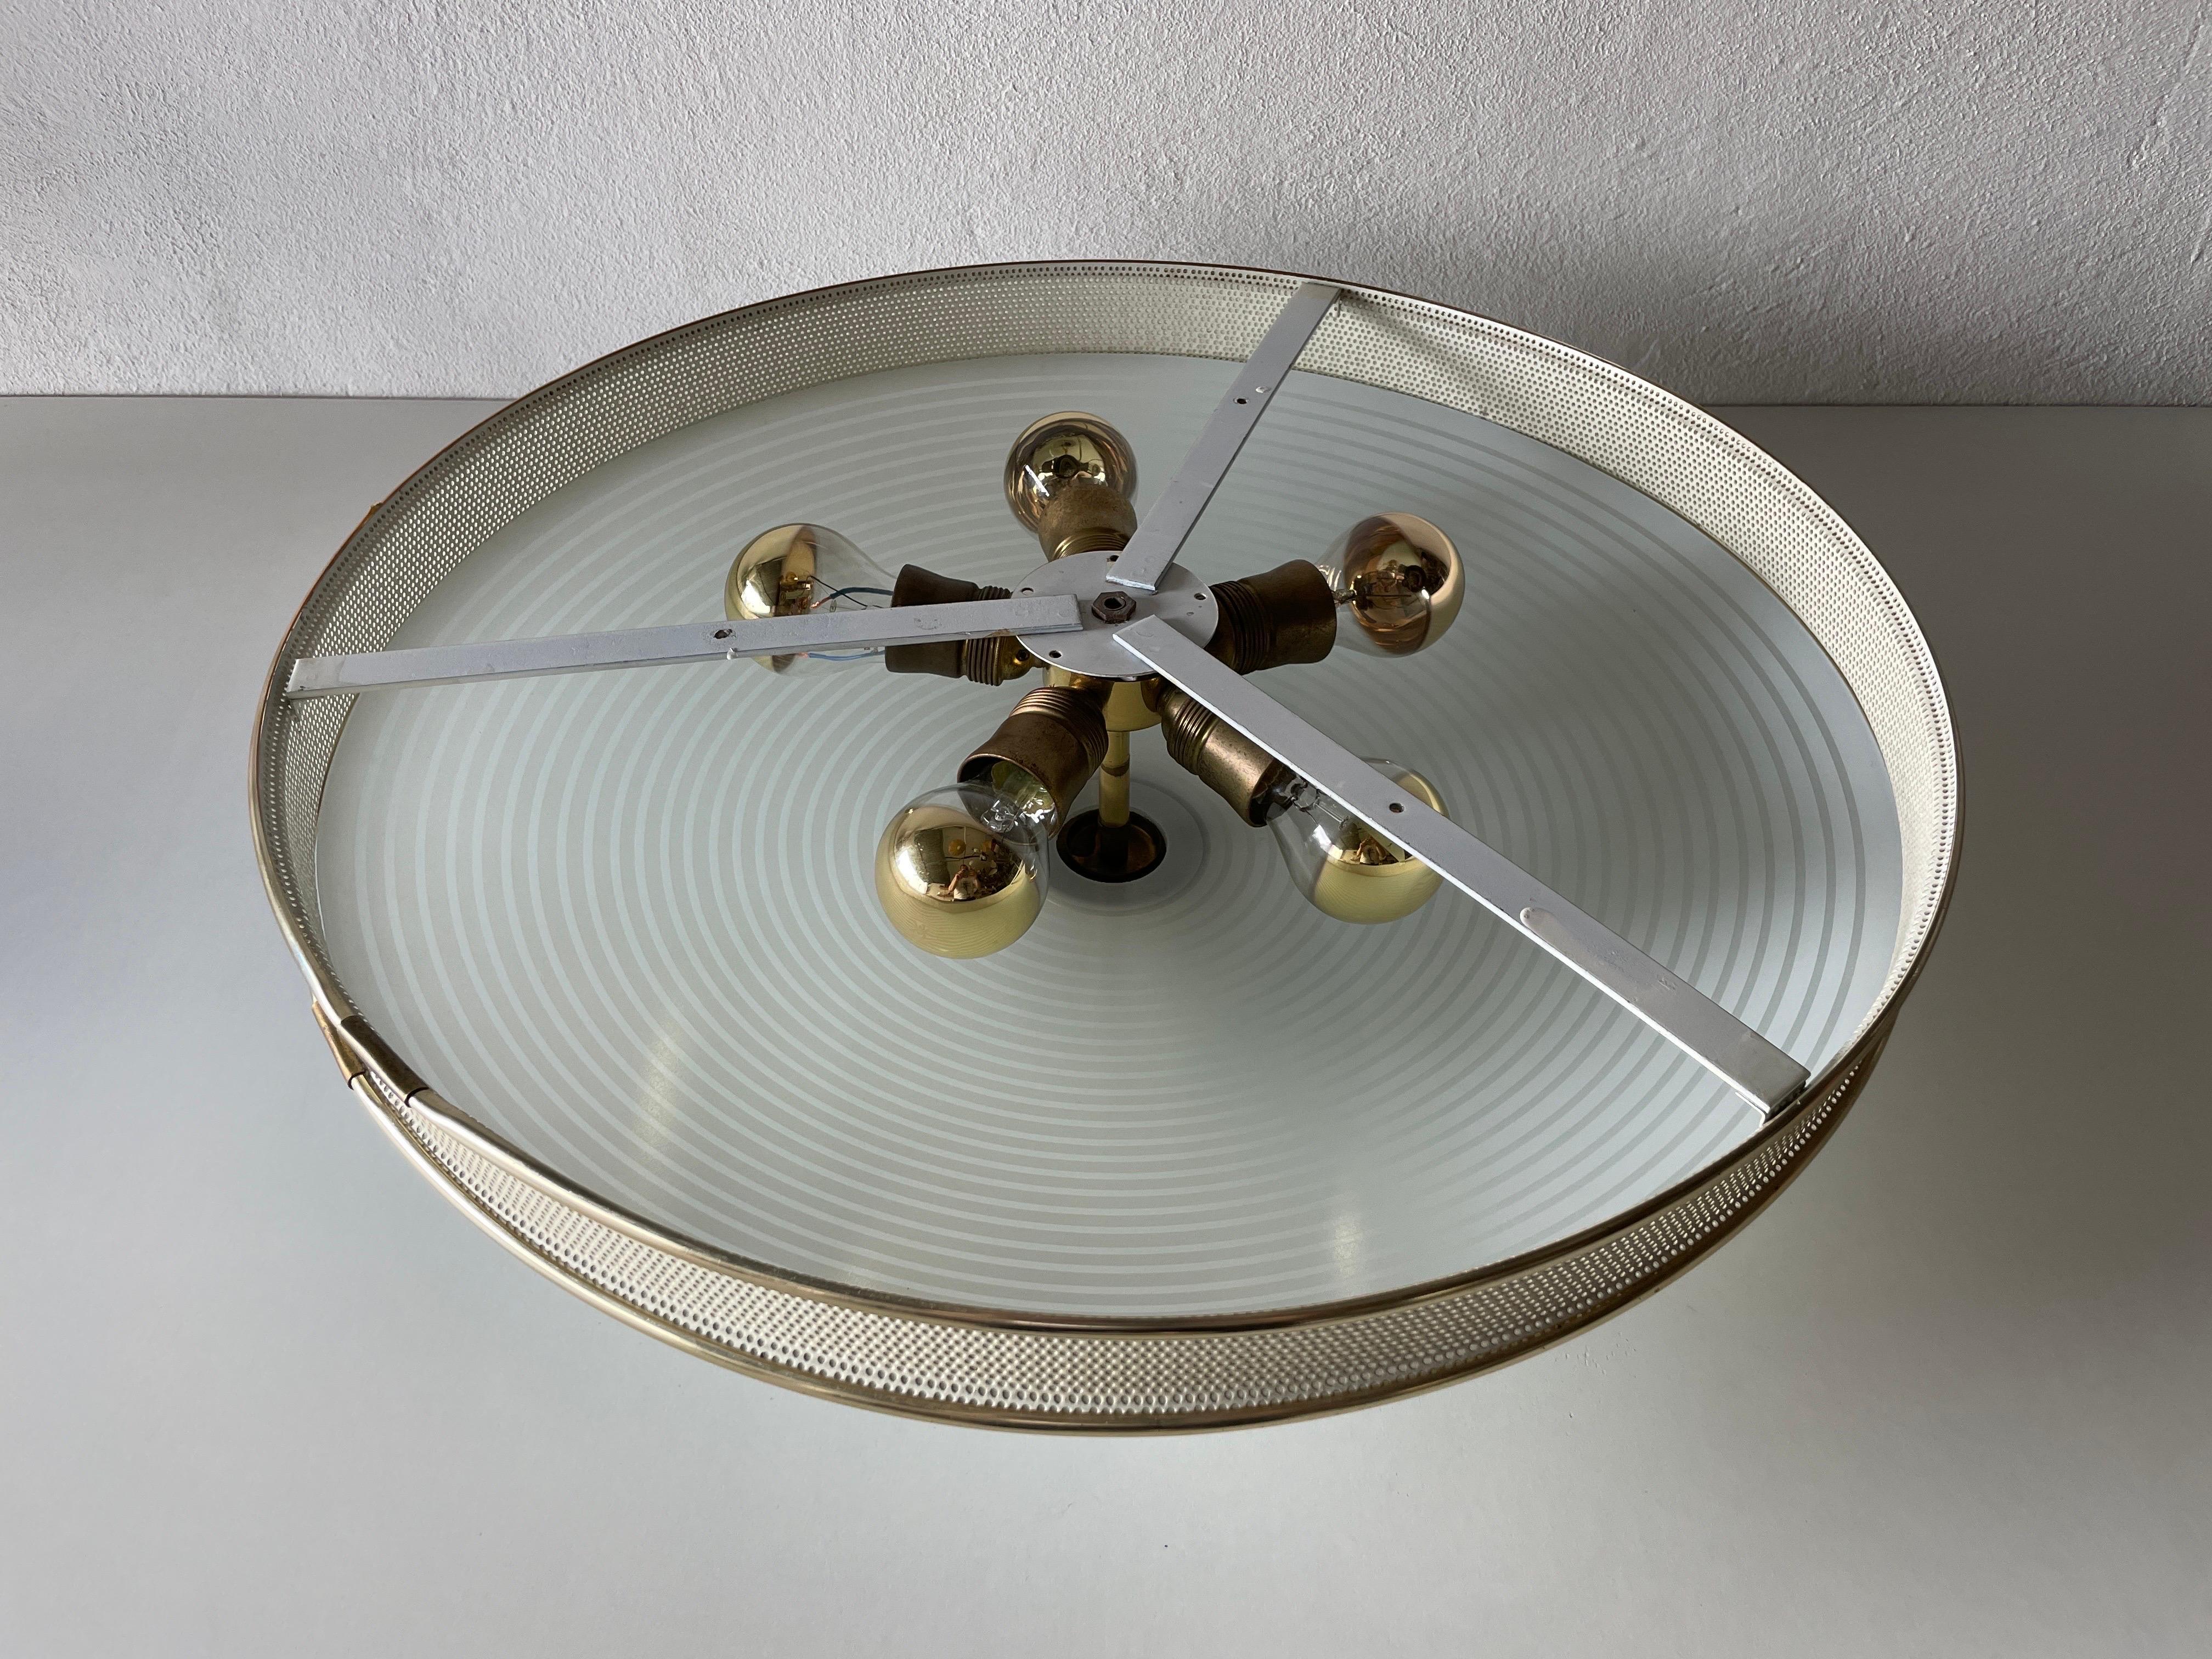 Ufo Design Glass Metal Flush Mount Ceiling Lamp by Hillebrand, 1950s, Germany For Sale 13